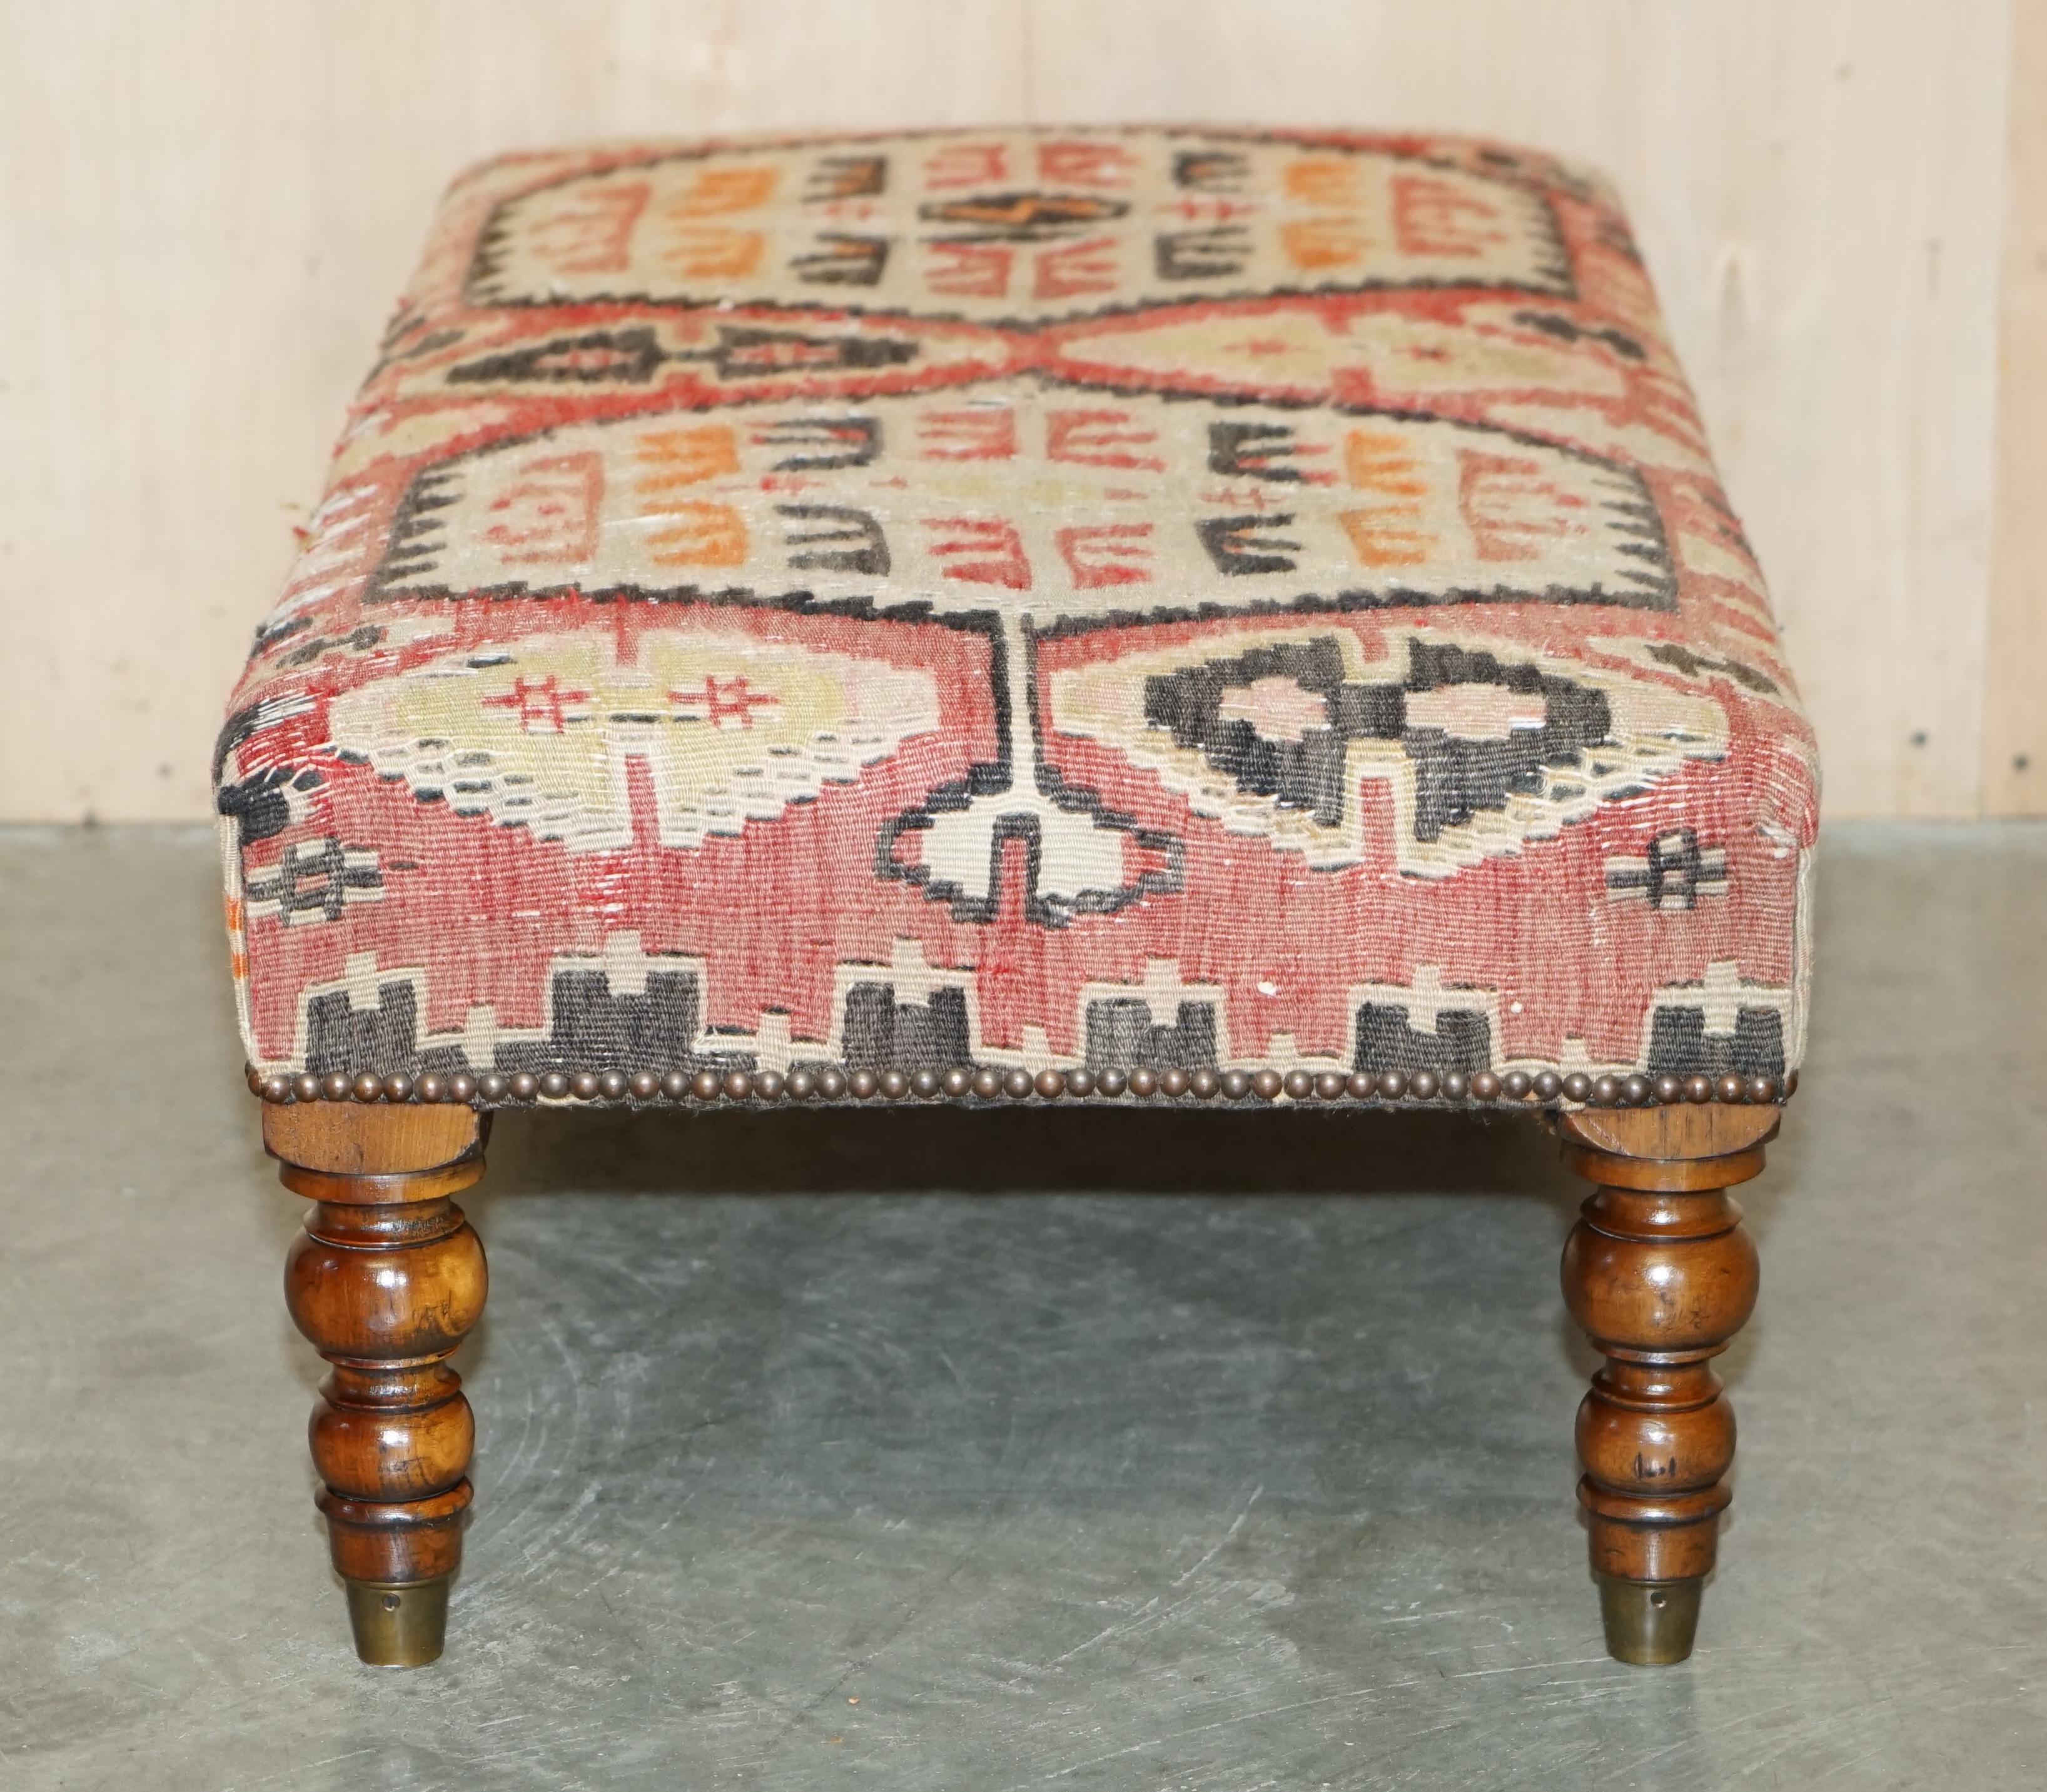 STUNNING AND COLLECTABLE ViNTAGE GEORGE SMITH CHELSEA KILIM FOOTSTOOL OTTOMAN 12